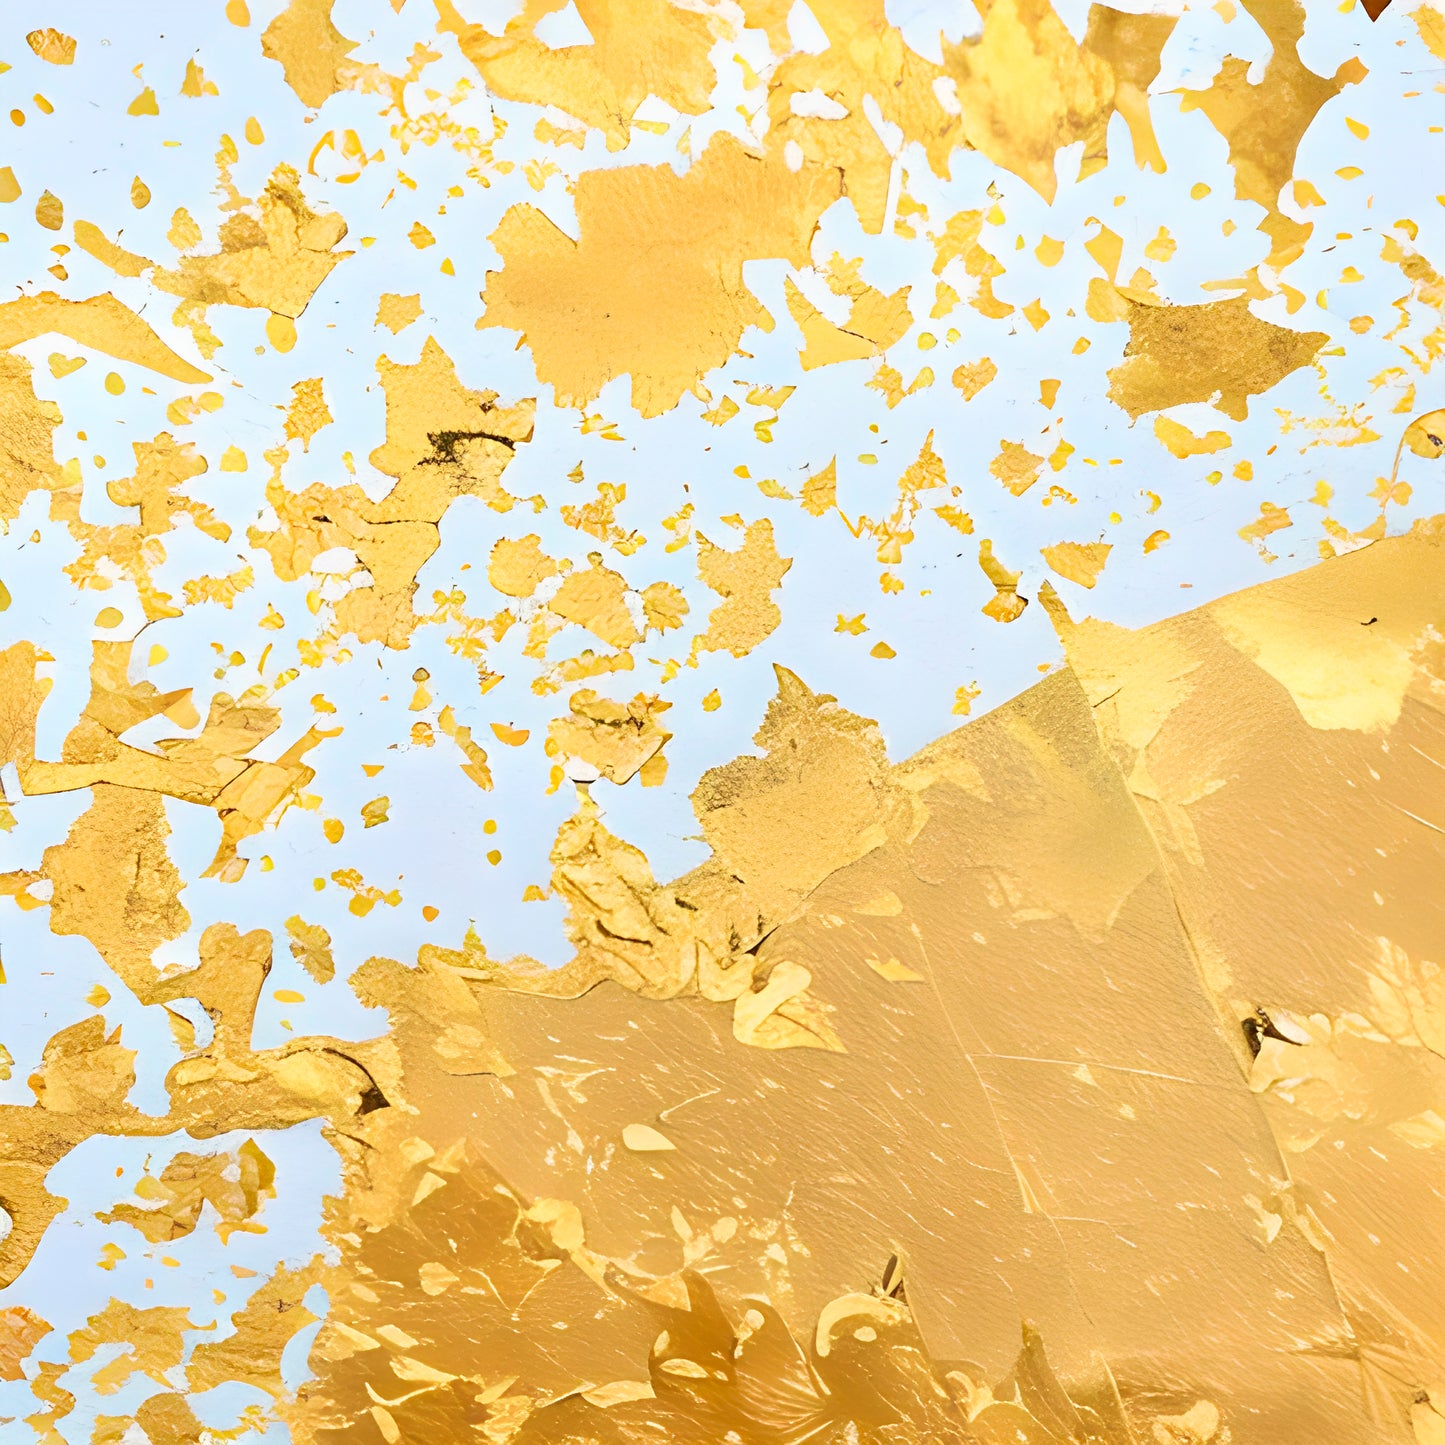 GOLD ABSTRACT